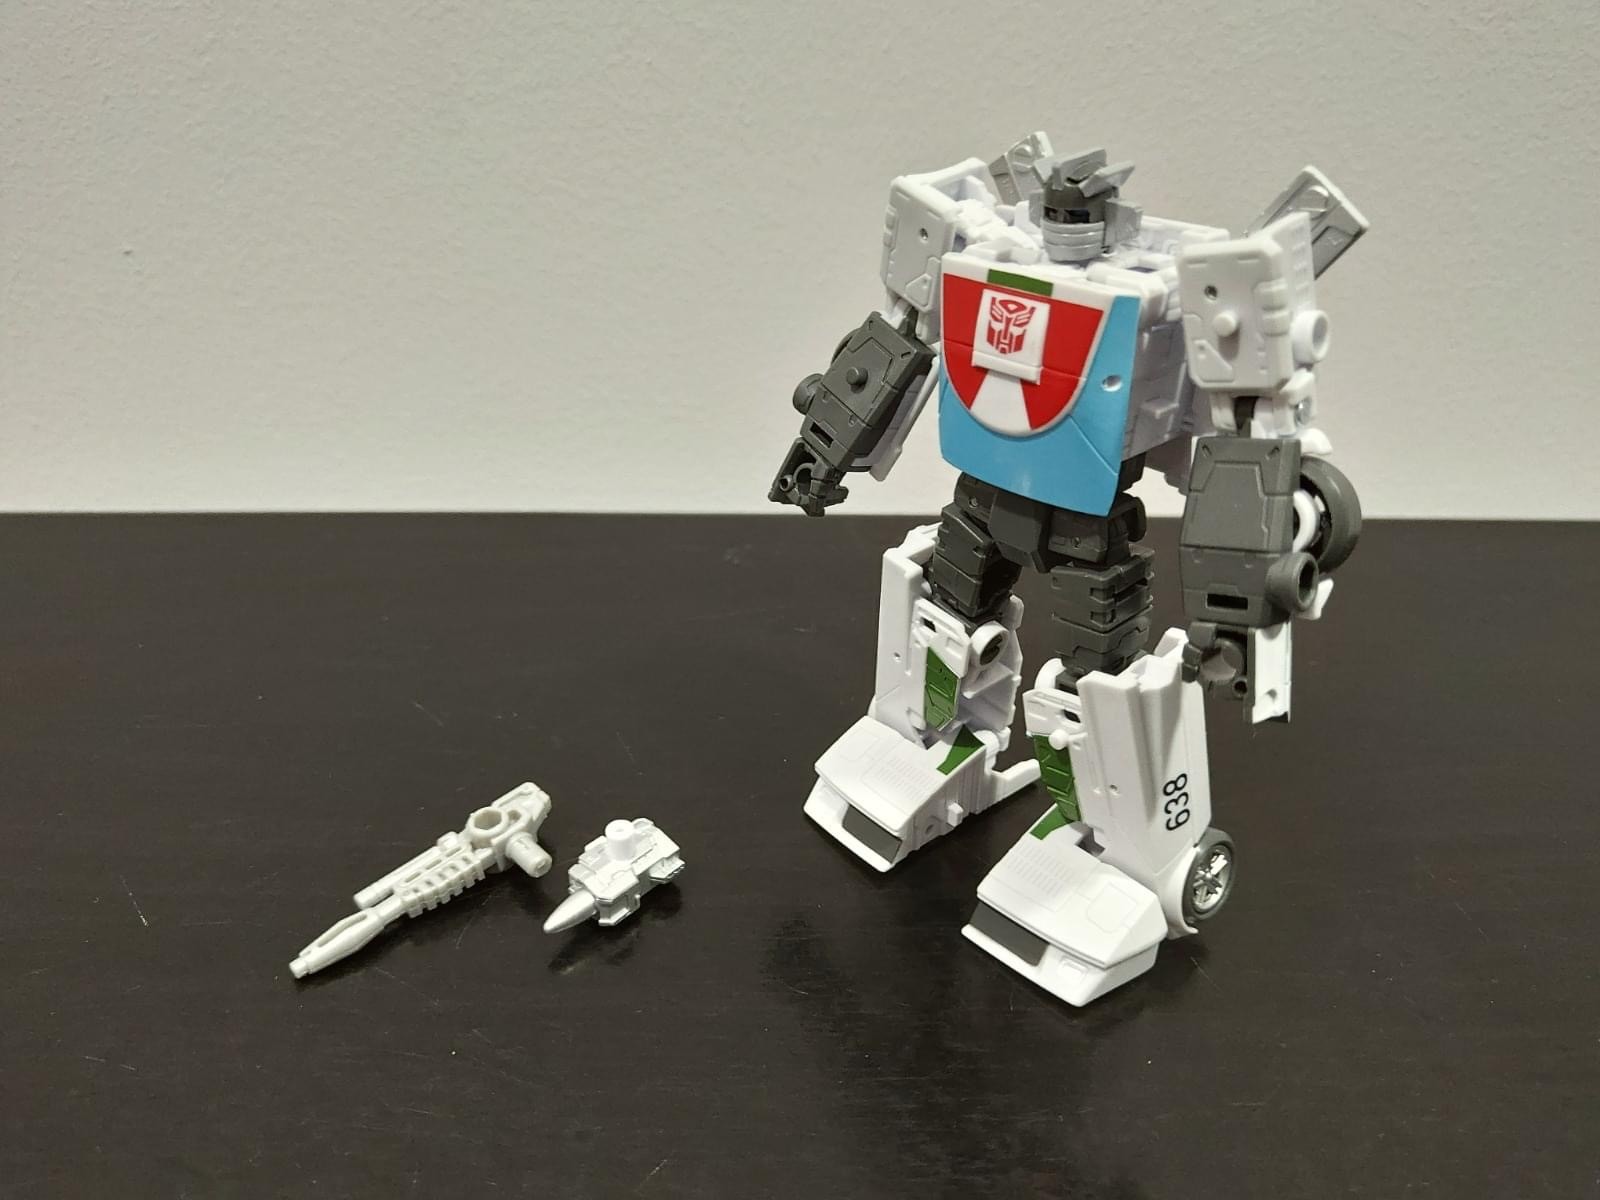 Transformers News: More Images of Upcoming Generations Wheeljack, Shockwave and Grimlock Redecos